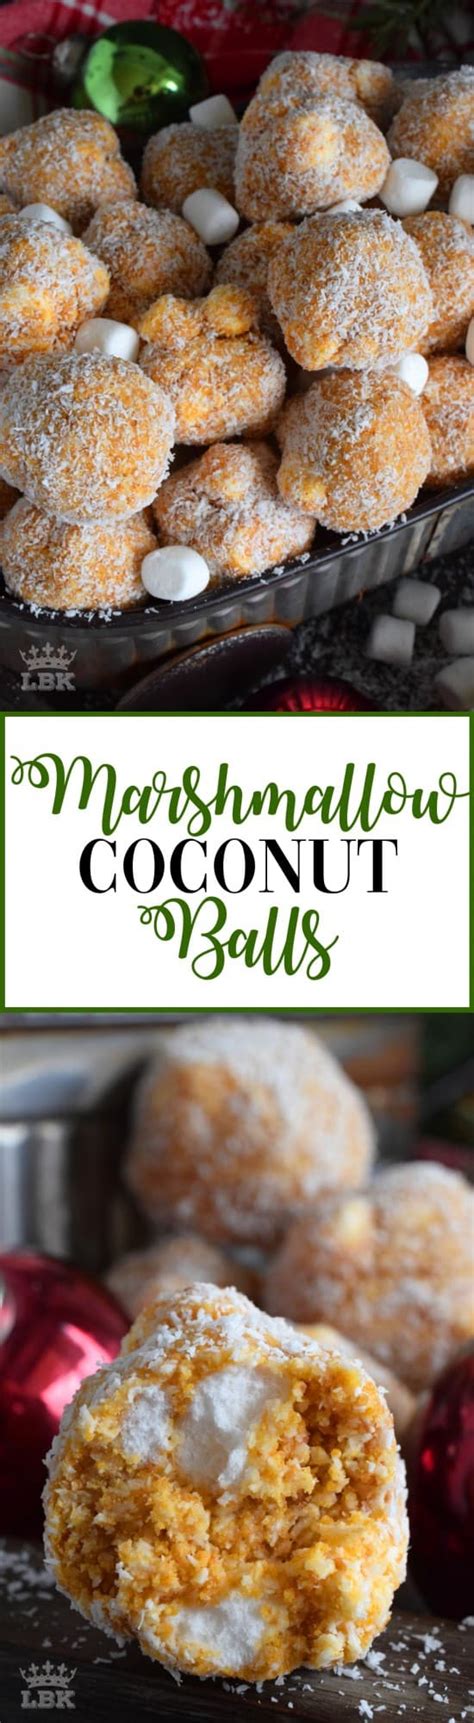 Grab incredible coconut balls on alibaba.com at amazing offers and enjoy unending possibilities. Marshmallow Coconut Balls - Lord Byron's Kitchen | Coconut ...